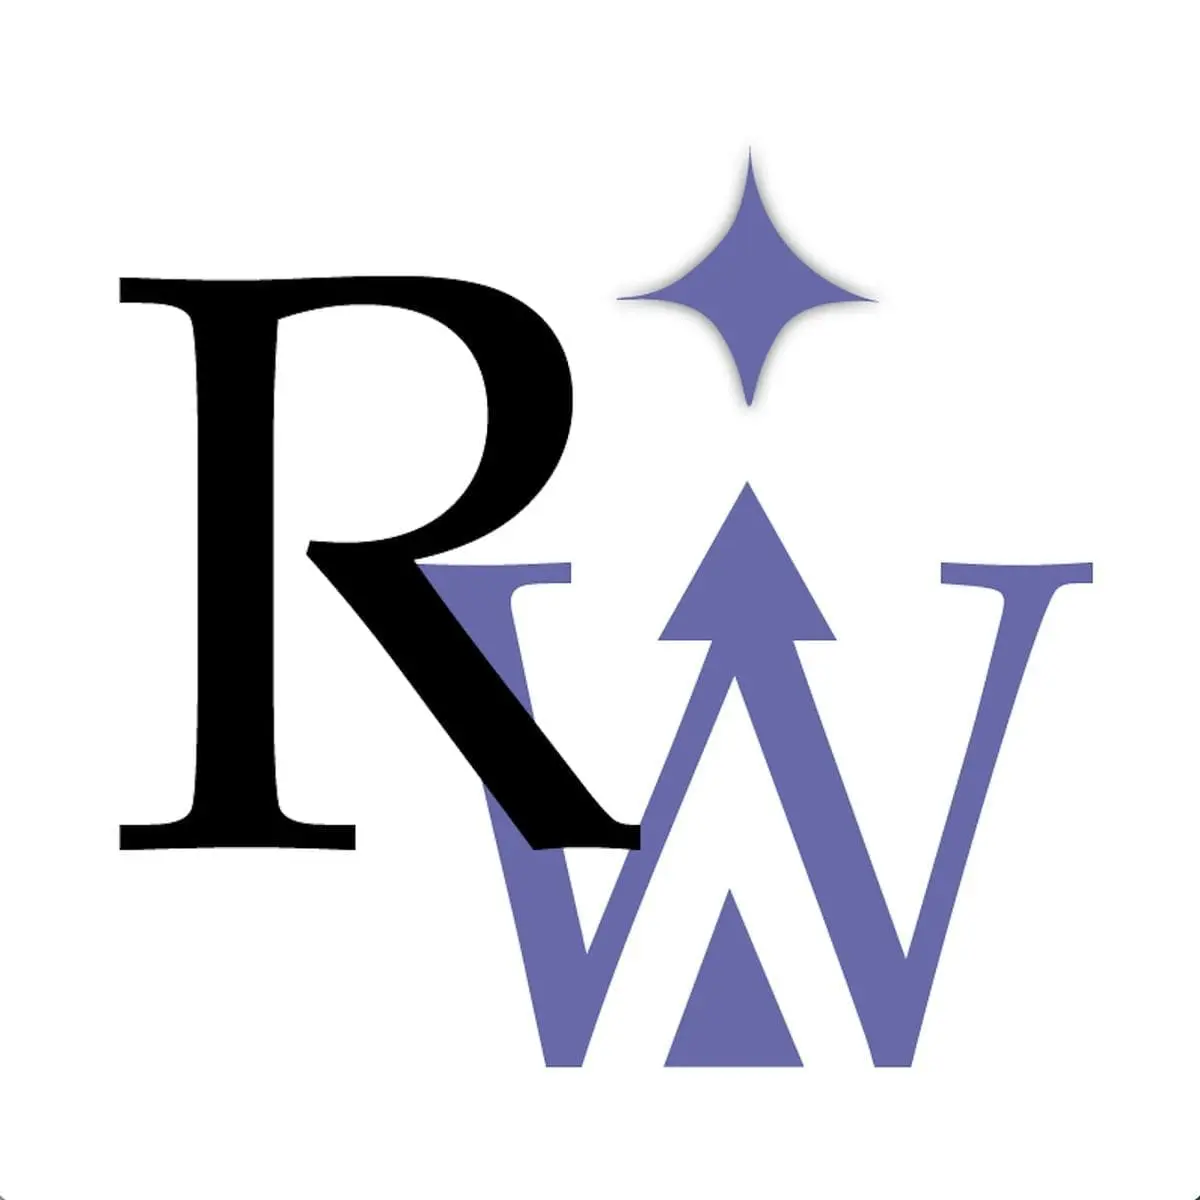 A black and white image of the logo for r & w.